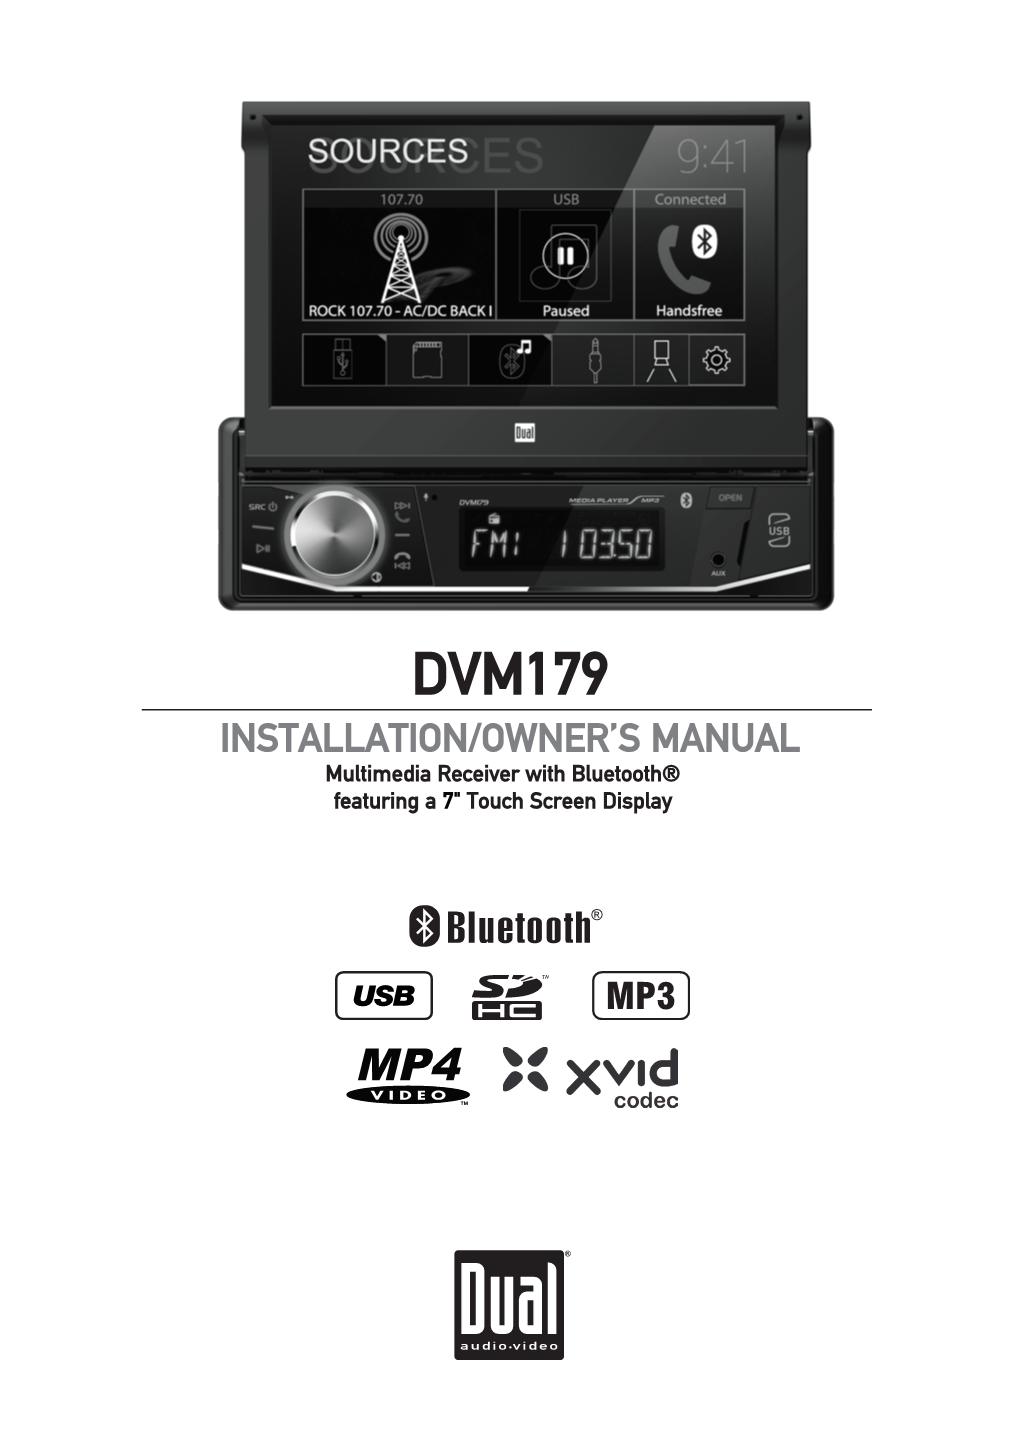 DUAL DVM179 Is Installed by a Professional Installer Or an Authorized Dealer